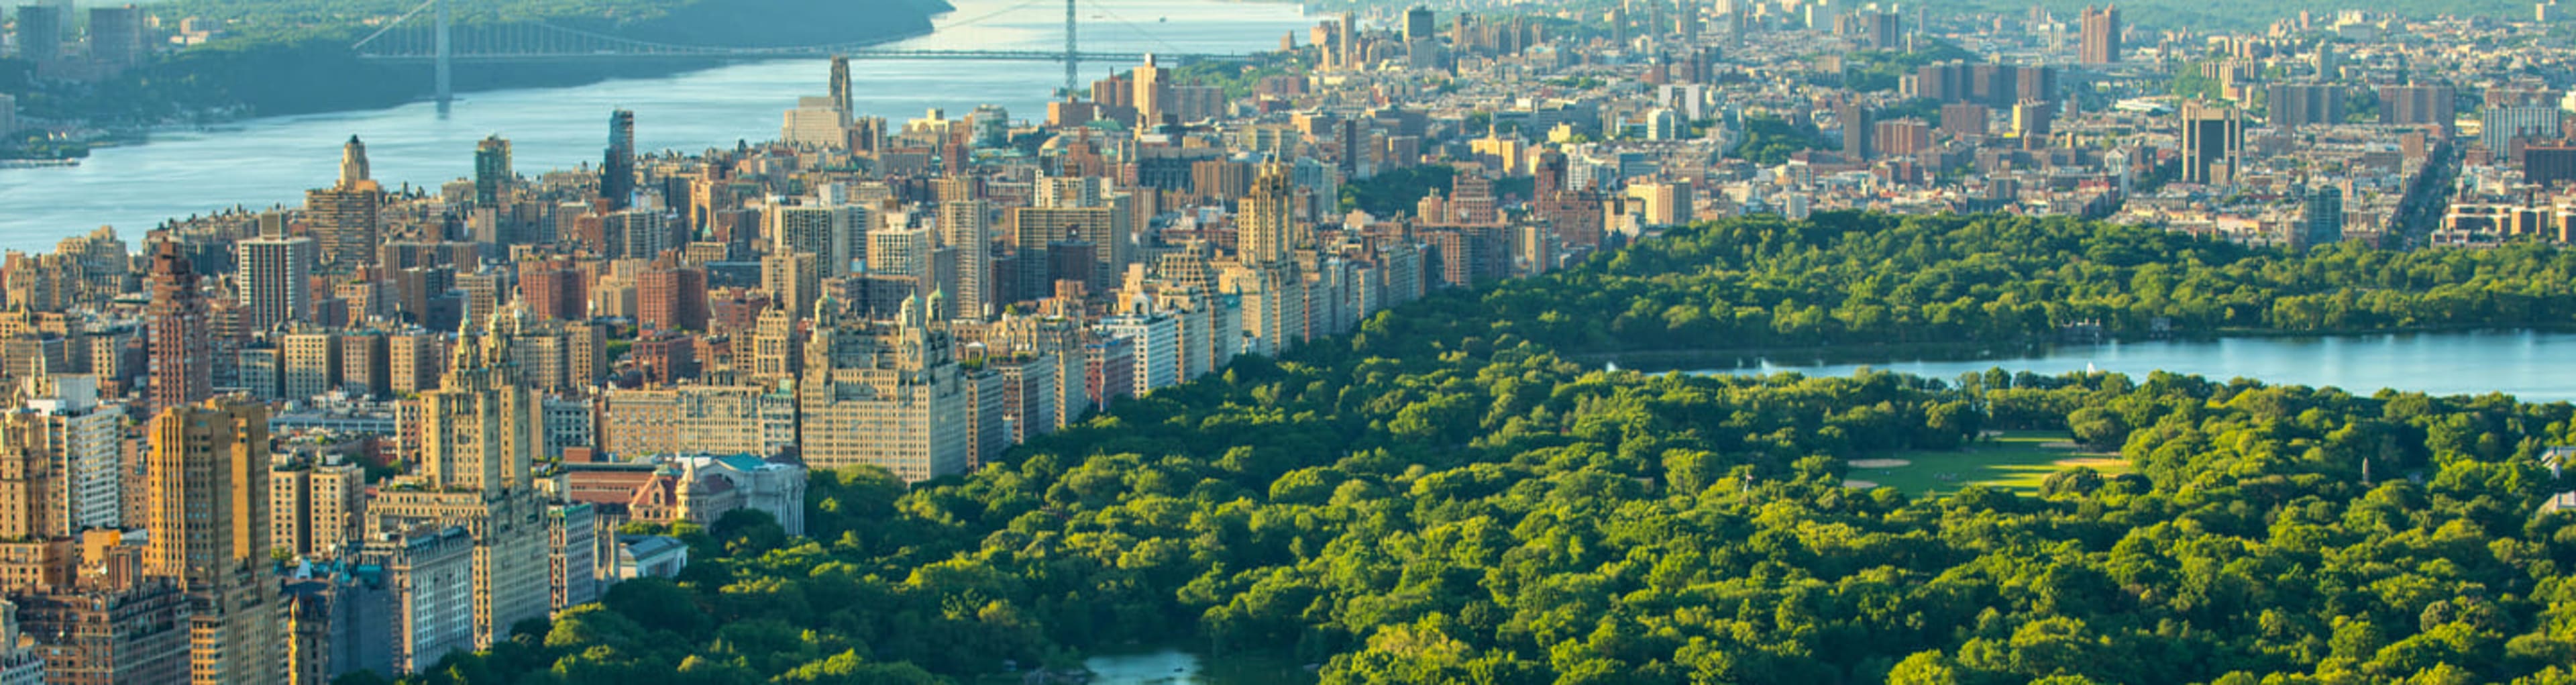 Panoramic view of Central Park and the Hudson in New York